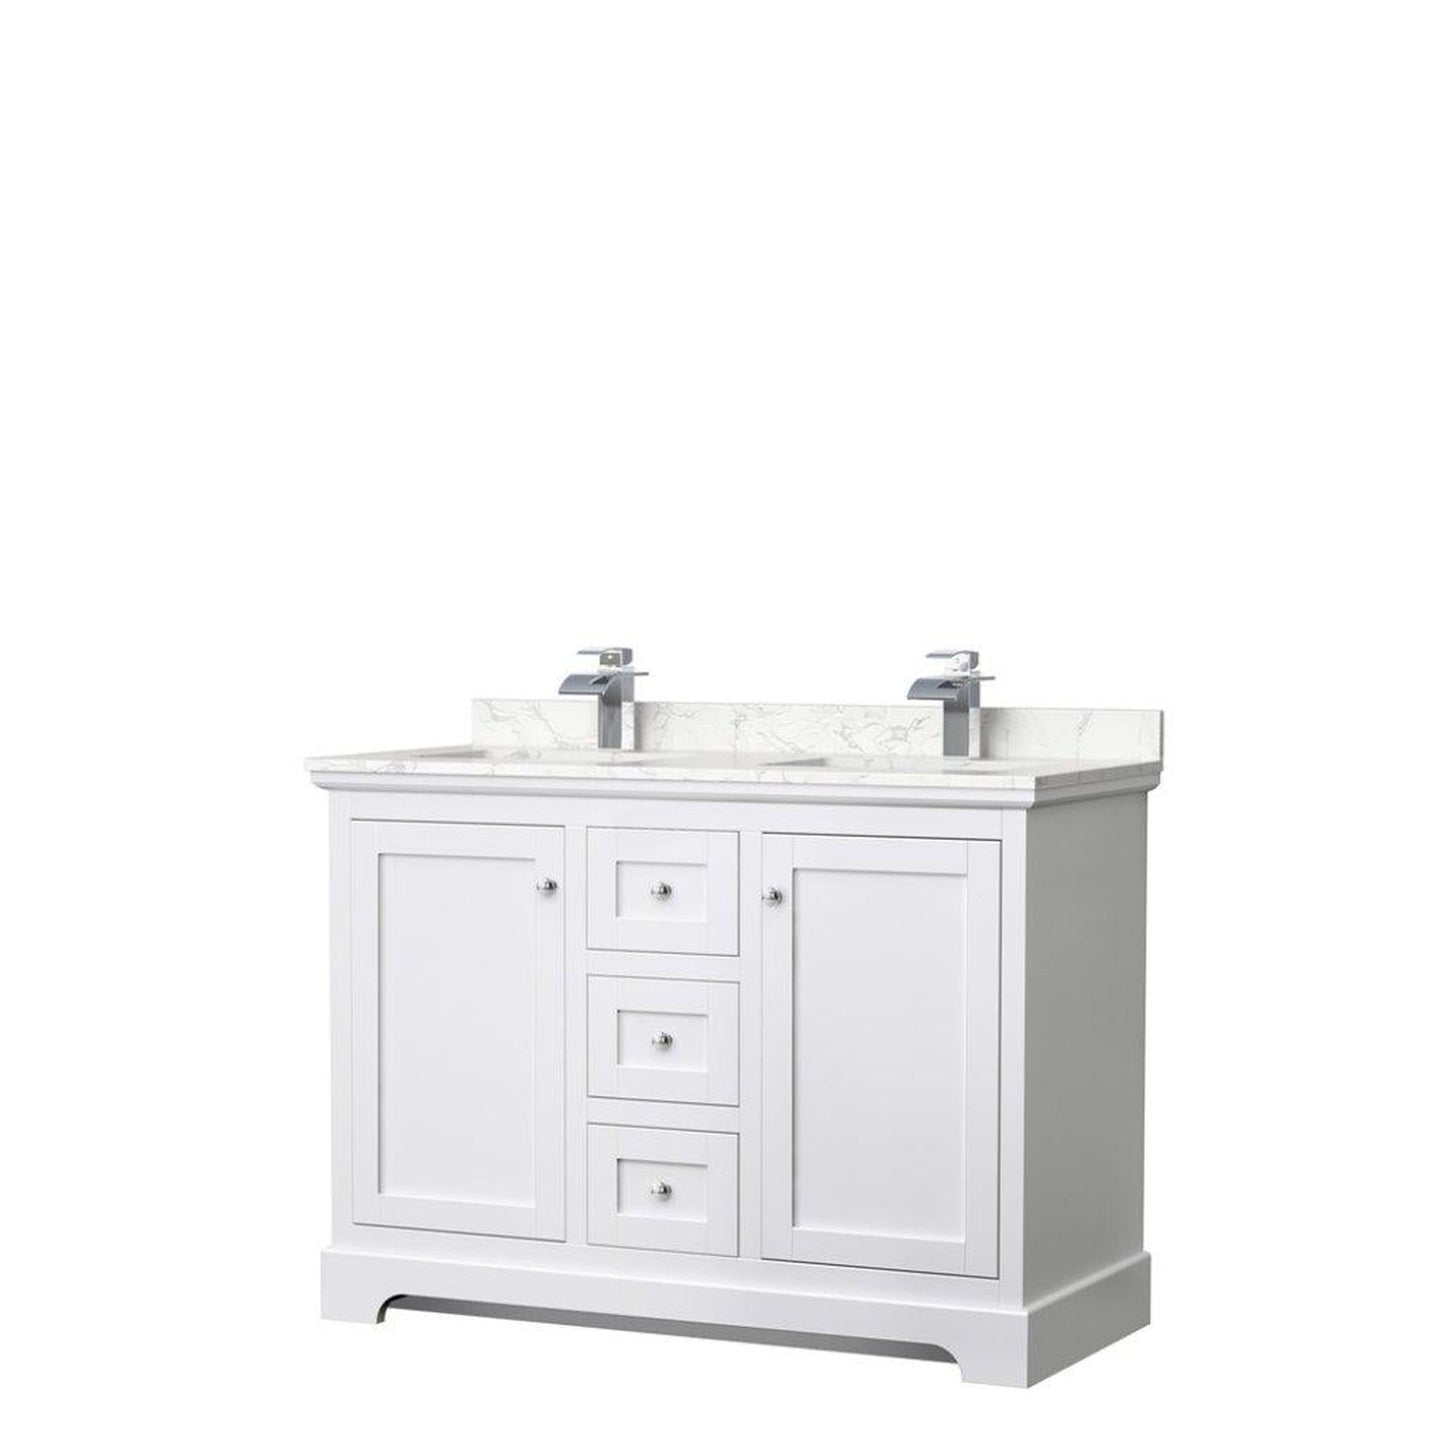 Wyndham Collection Avery 48" White Double Bathroom Vanity, Dark-Vein Carrara Cultured Marble Countertop With 1-Hole Faucet, Square Sink, Polished Chrome Trims